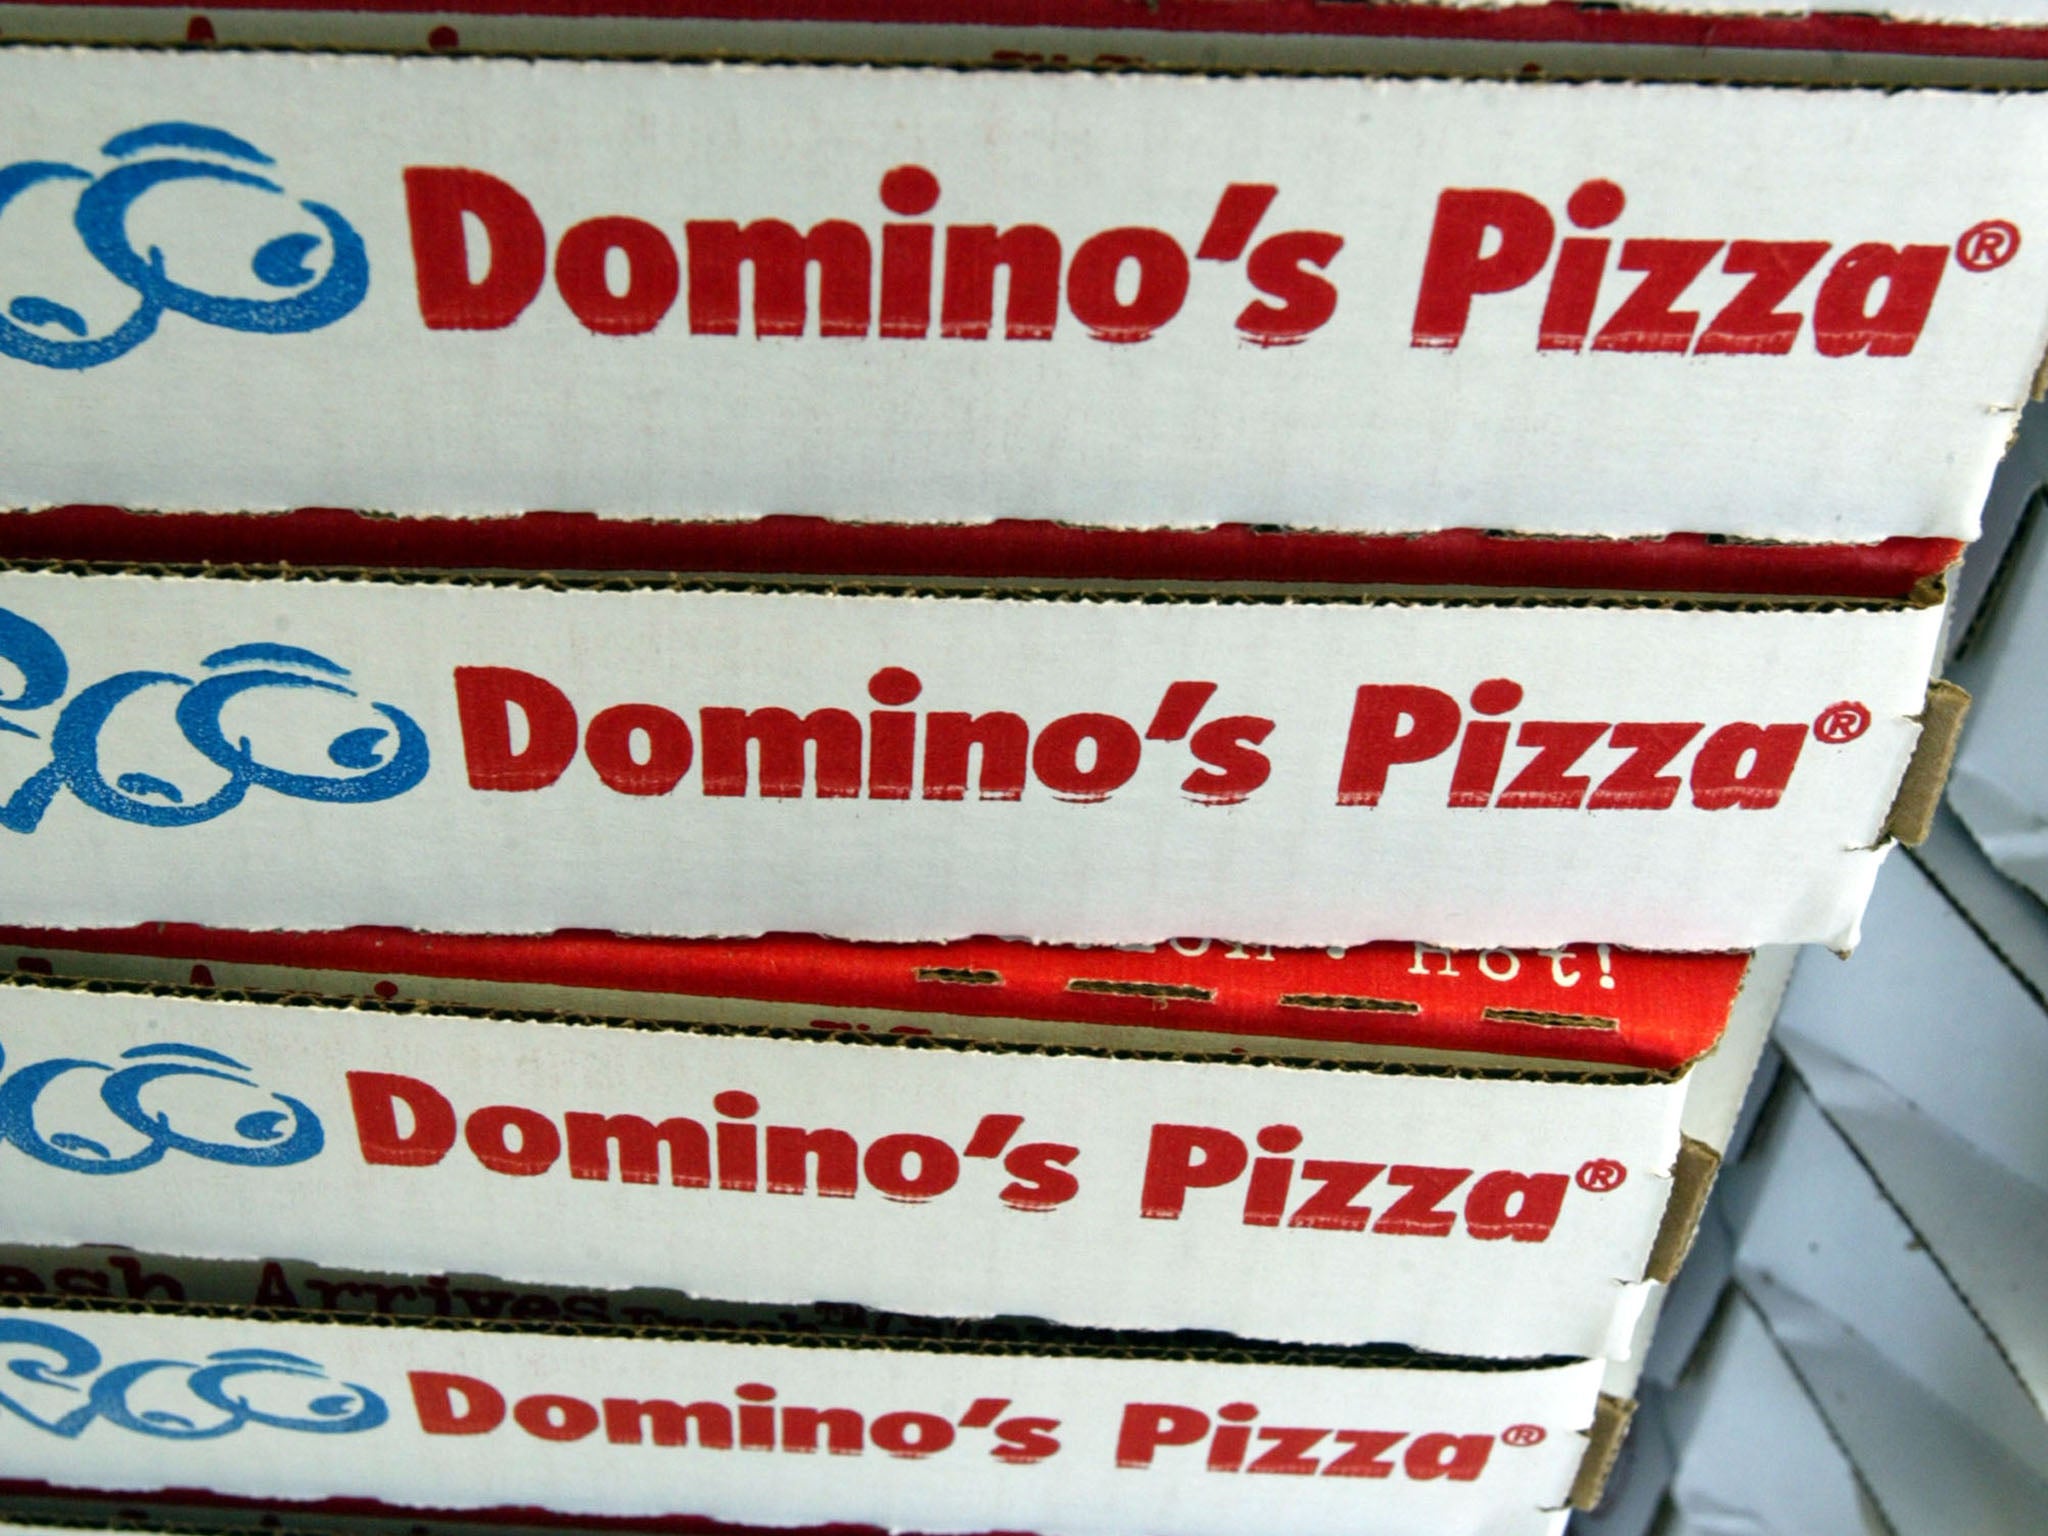 Three quarters of Domino's Pizza deliveries are now booked online, with half of those coming from mobile phone apps.